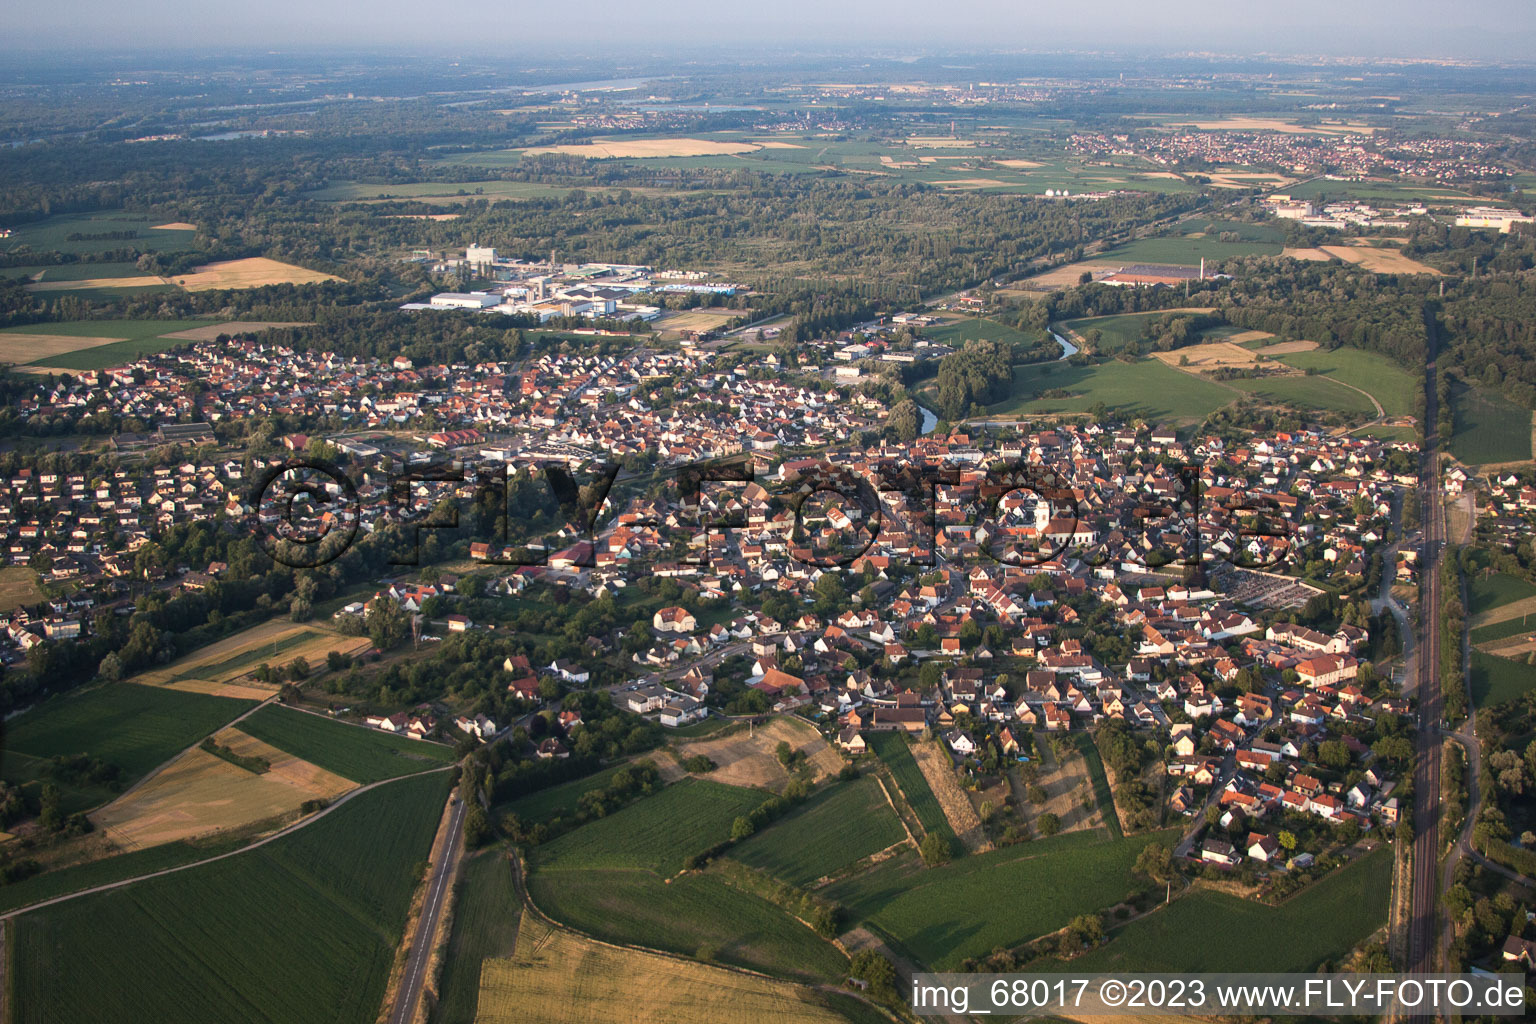 Drusenheim in the state Bas-Rhin, France from the drone perspective